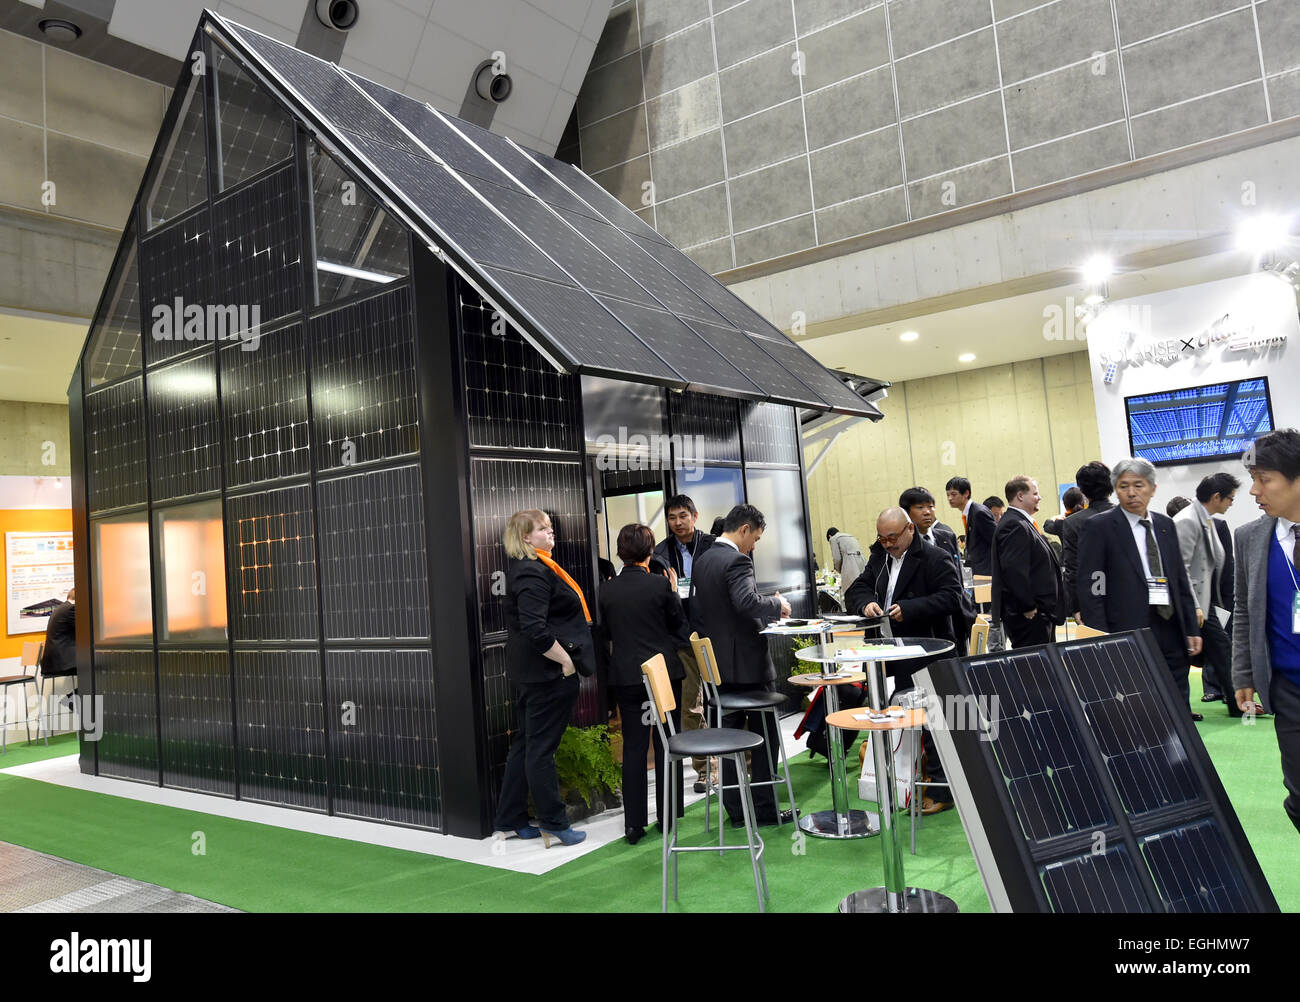 Tokyo, Japan. 25th Feb, 2015. Solar panels are on display at the World Smart Energy Week 2015, billed as the worlds largest exhibition specializing in electricity storage and generating systems, started on Wednesday, February 25, 2015, in Tokyo for three days. Credit:  Natsuki Sakai/AFLO/Alamy Live News Stock Photo